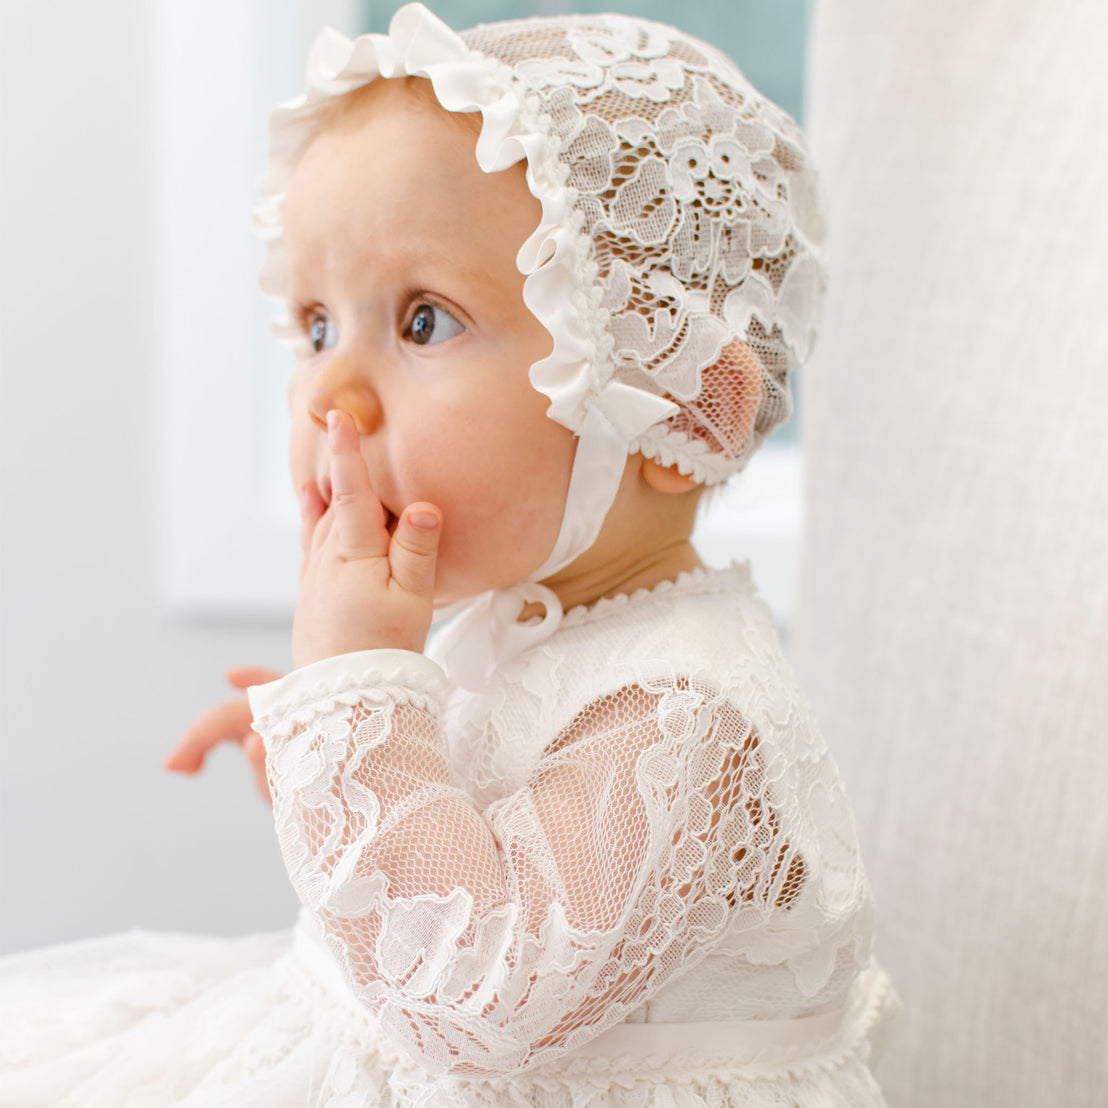 Baby girl with finger in mouth wearing a long-sleeved baptism gown and also a lace baptism bonnet.